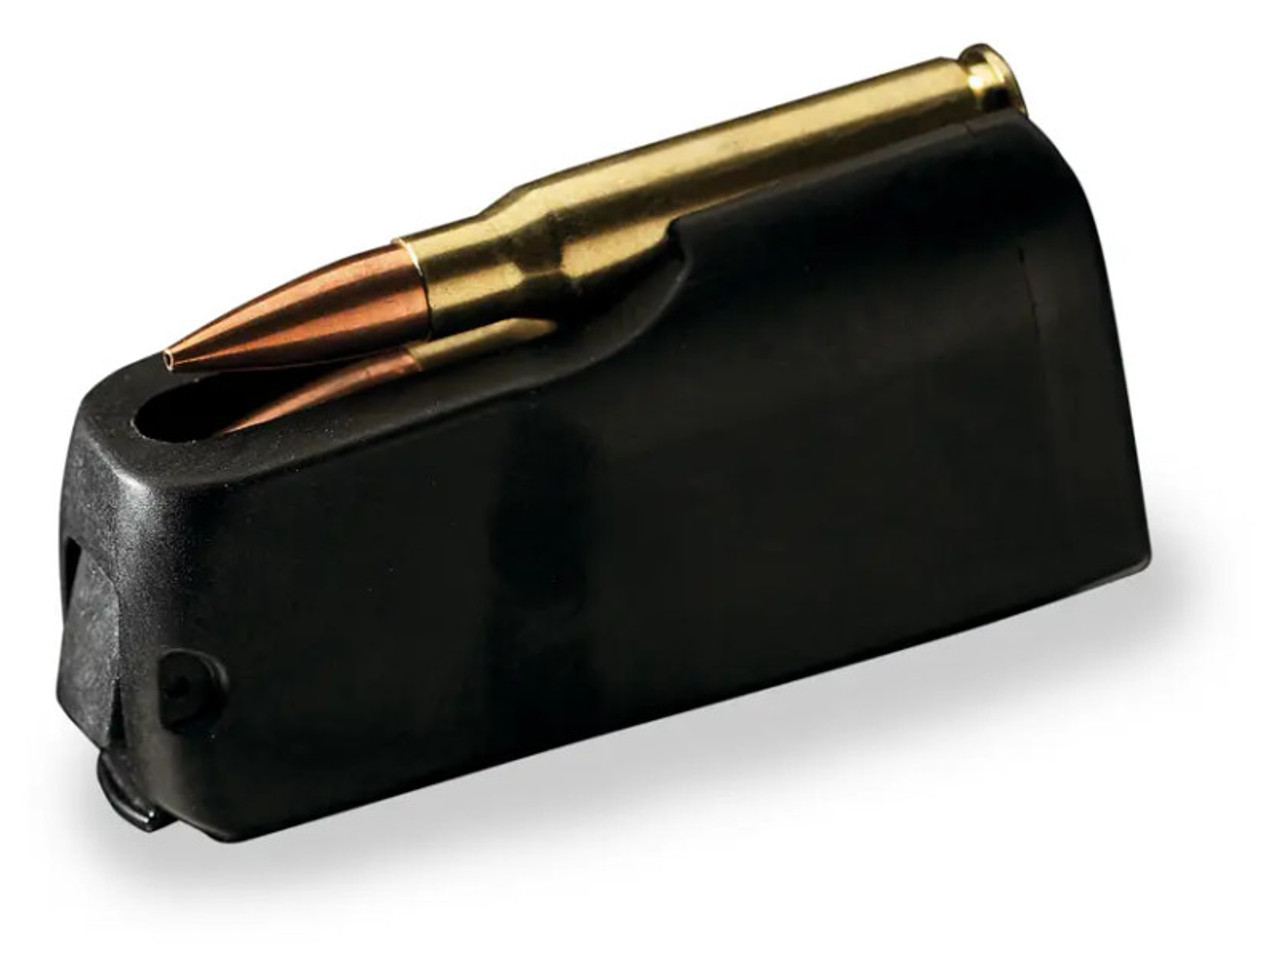 There is nothing cheap about the look and feel of the X-Bolt rotary magazine. It's designed to be reliable and endure the punishment that will break lookalikes from competitors. Keep an extra magazine (or two) in your pocket to facilitate a quick reload when it counts.

FEATURES
Detachable rotary magazine constructed from a durable lightweight polymer
Feeds cartridges directly in line with the bolt, instead of offset as with traditional leaf-spring magazines for a straight path right into the chamber
Ergonomic magazine-mounted release
Magnum caliber holds three cartridges
Unique design holds U.S. patent numbers: 8,156,675; 8,484,875 and 8,745,912

